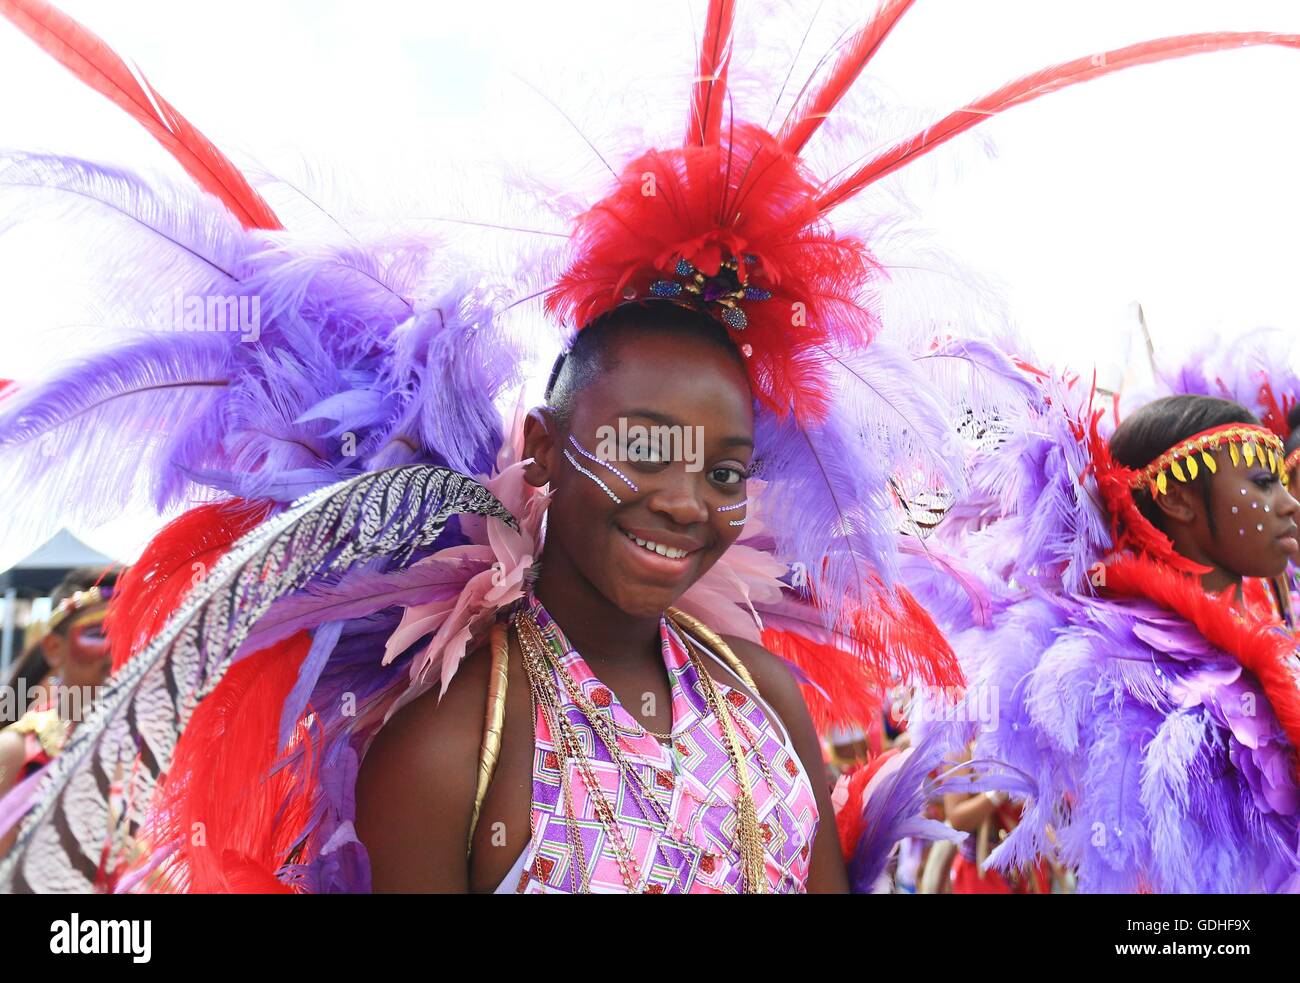 Toronto, Canada. 16th July, 2016. Girls attend the Junior Parade of the 2016 Caribbean Carnival in Toronto, Canada, July 16, 2016. Over 2,000 junior masqueraders took part in the annual traditional parade on Saturday. Credit:  Zou Zheng/Xinhua/Alamy Live News Stock Photo